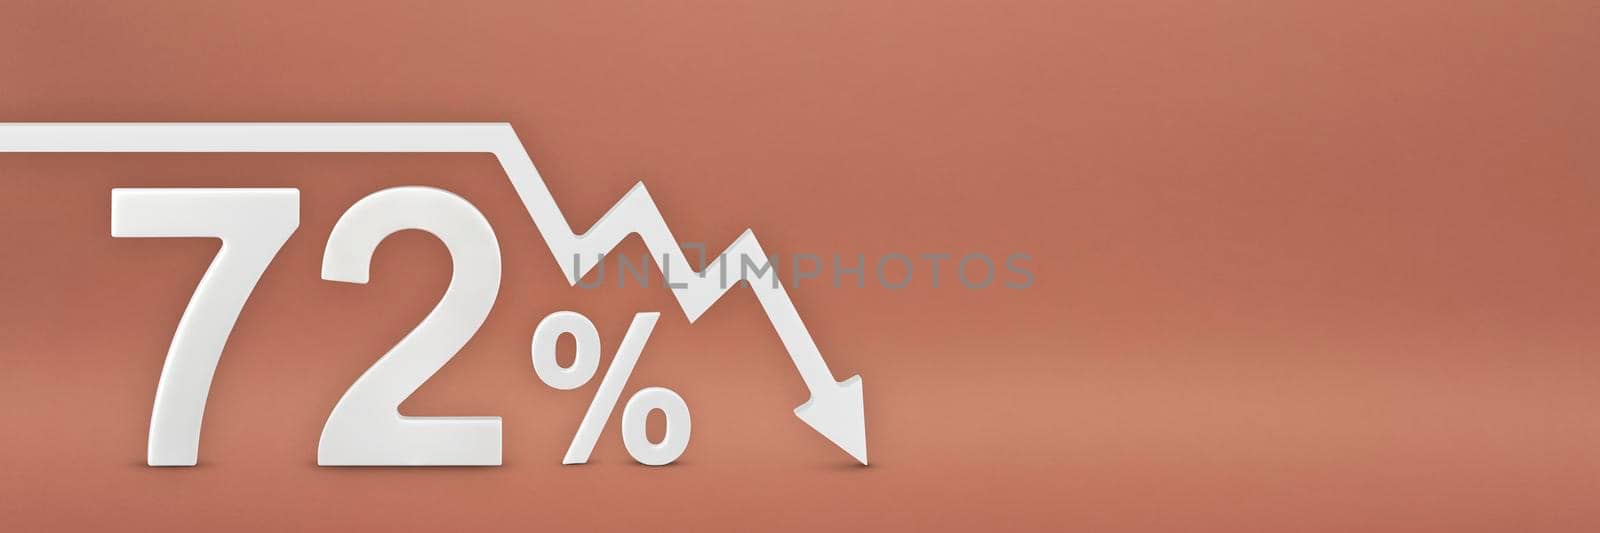 seventy-two percent, the arrow on the graph is pointing down. Stock market crash, bear market, inflation.Economic collapse, collapse of stocks.3d banner,72 percent discount sign on a red background. by SERSOL